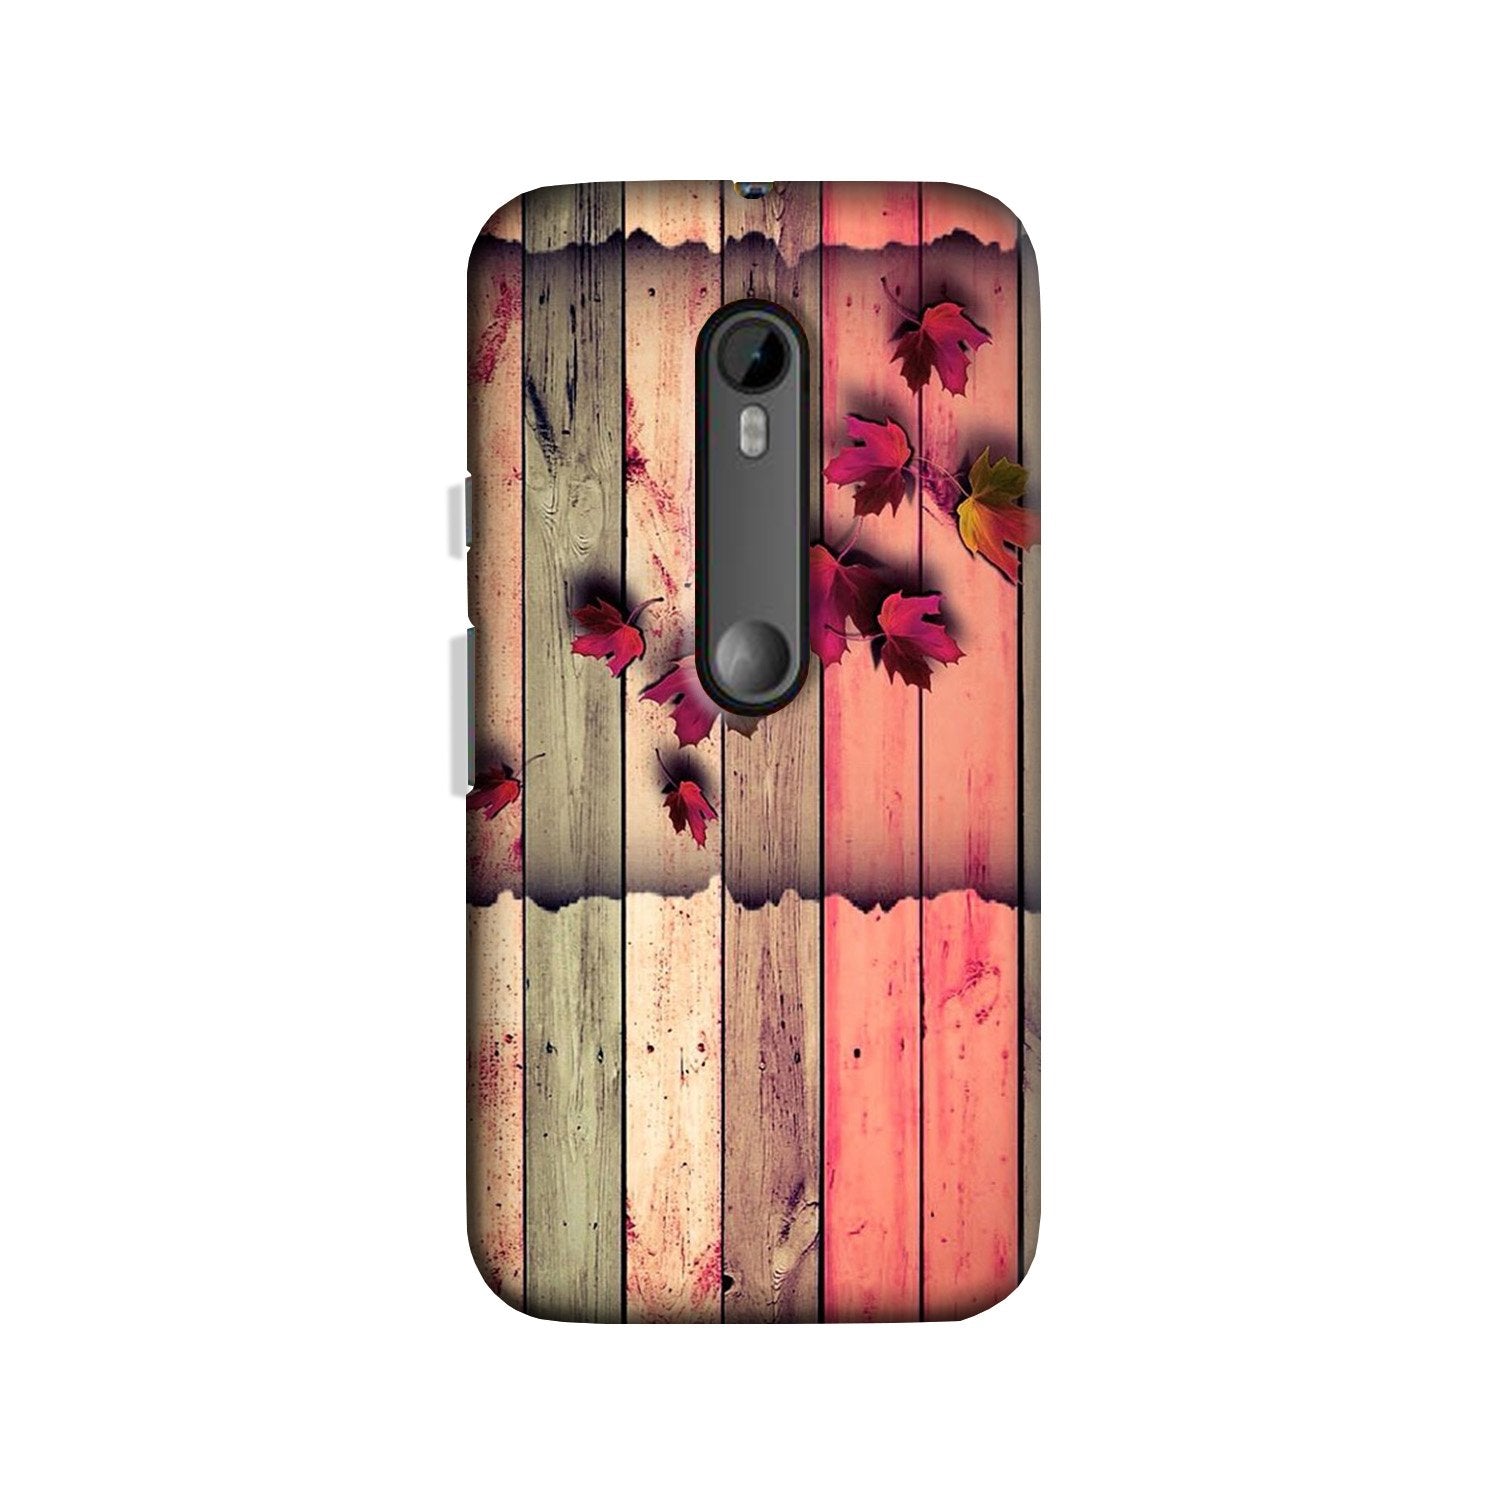 Wooden look2 Case for Moto G3